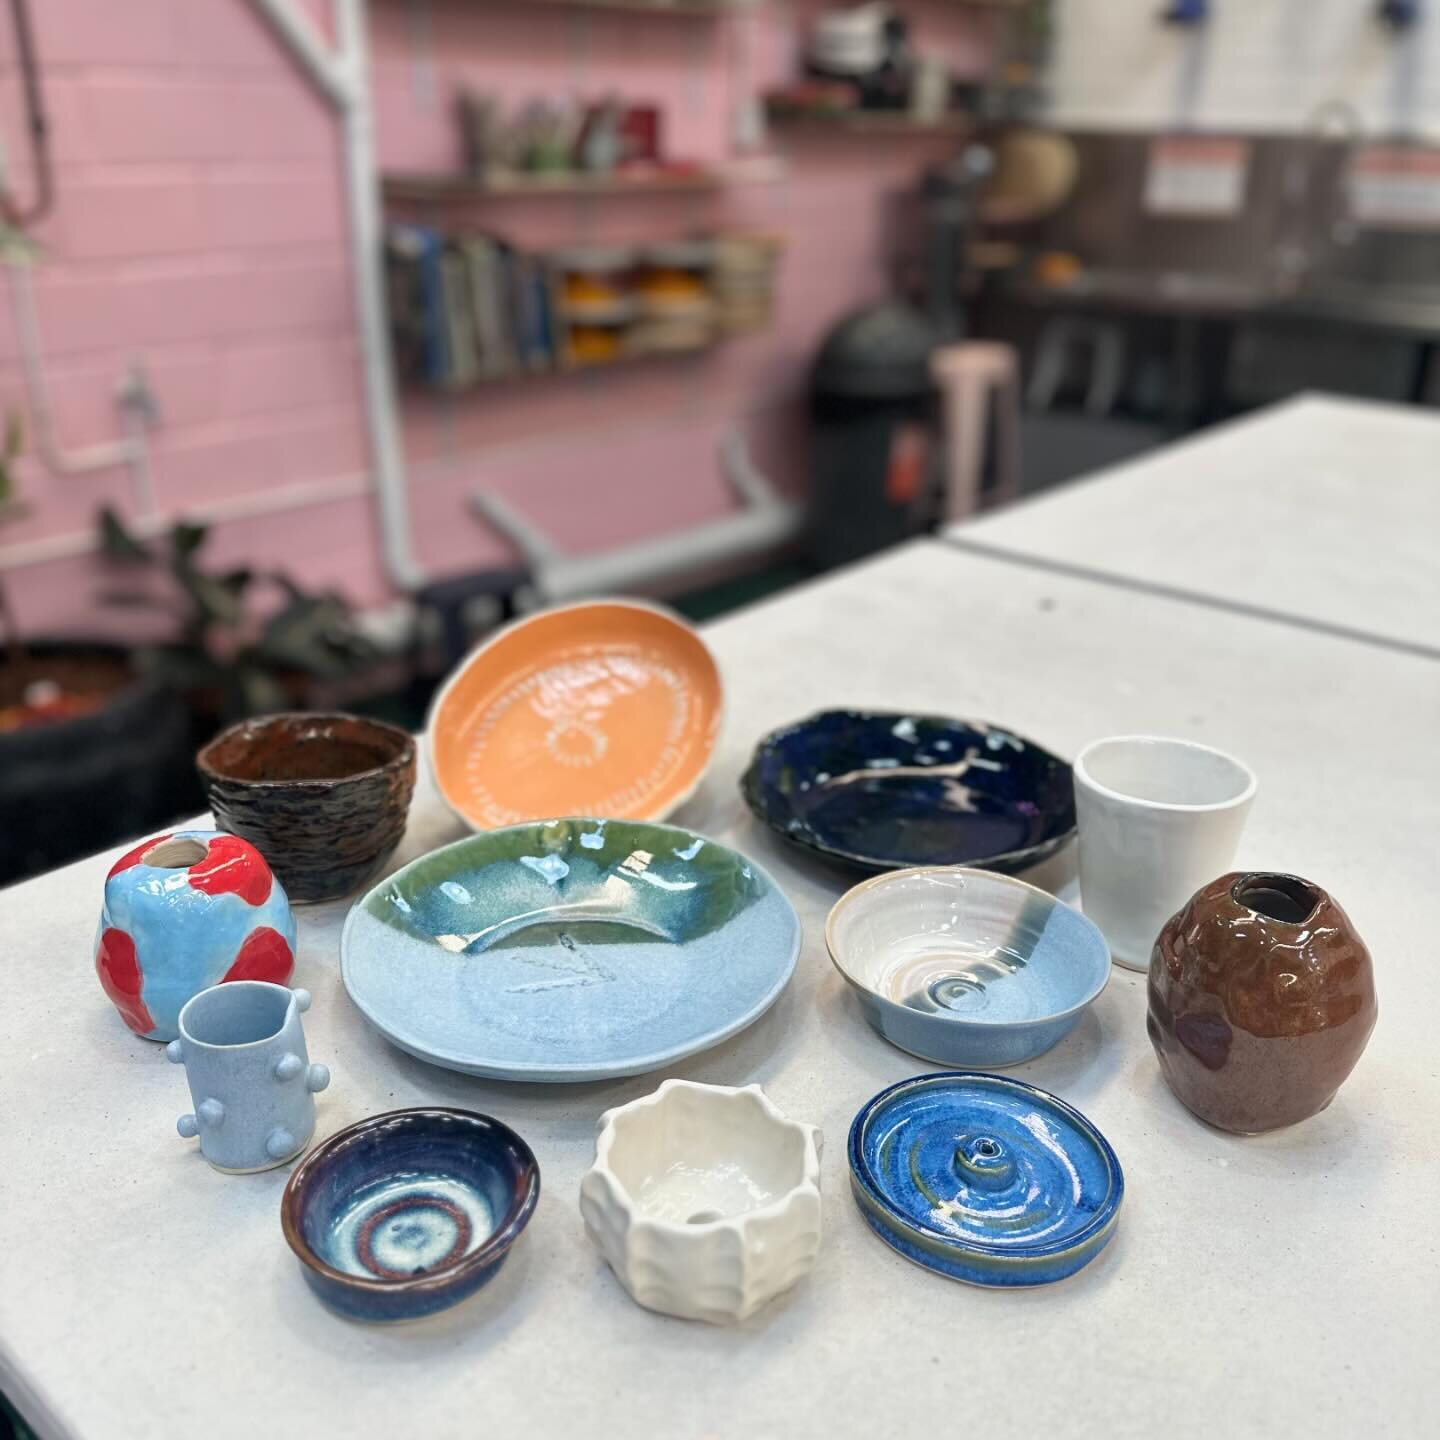 ☺️A couple of pretties from the kiln. 
If you&rsquo;d like to make your own collection check out our upcoming courses!

👉🏼 6 Week Intro to Cermaics - Exploring Handbuilding, Wheel Work &amp; a range of surface decoration techniques. 
👉🏼 6 Week Wh